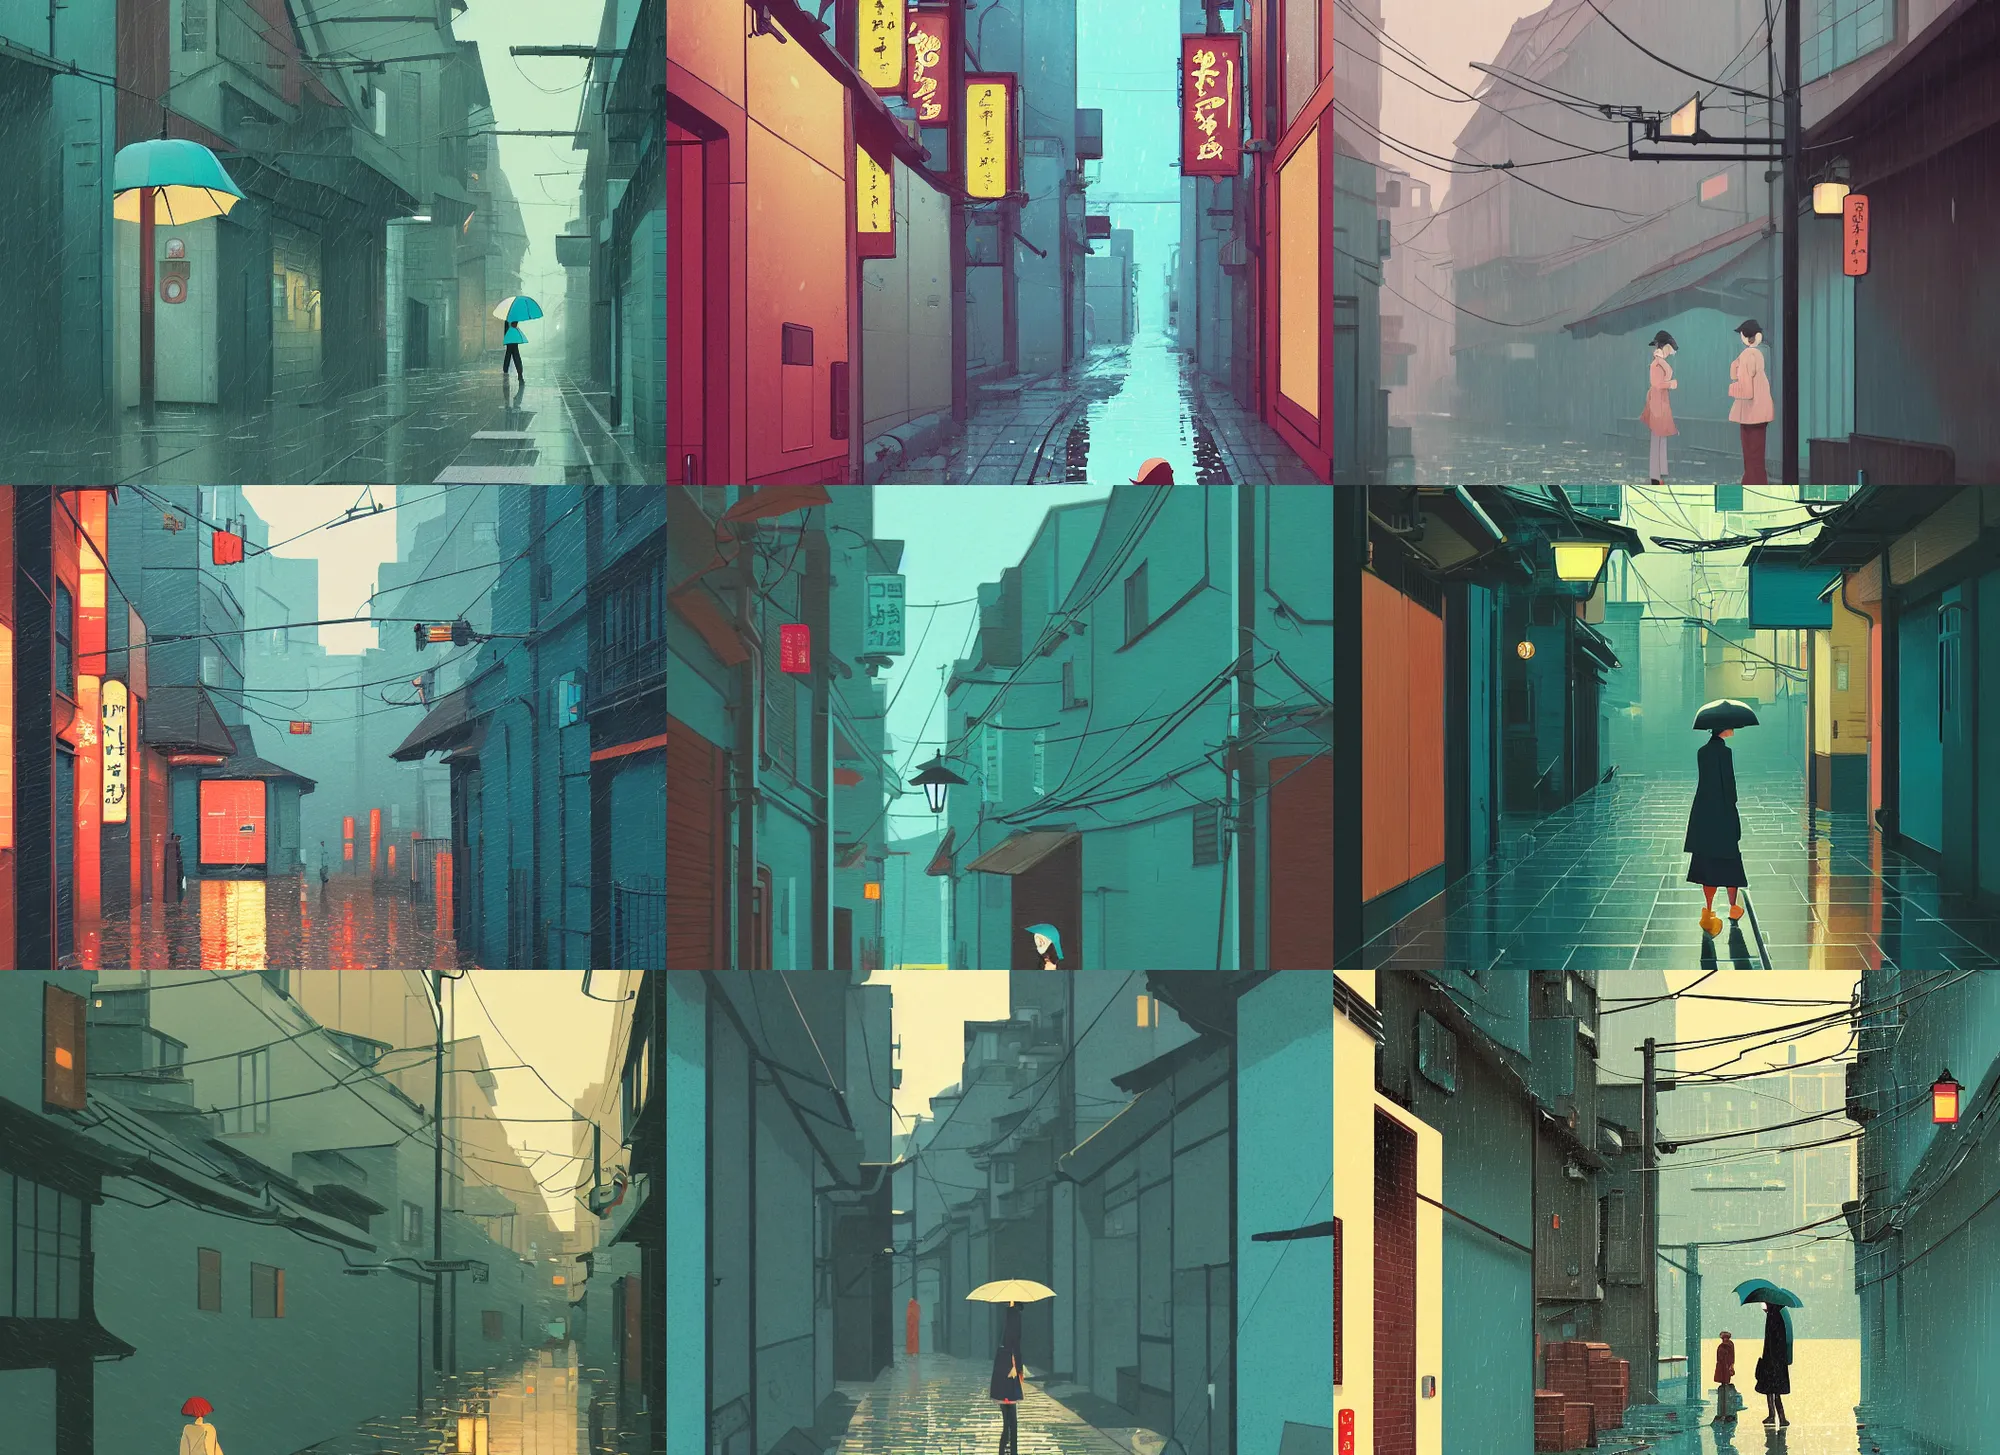 Prompt: tokyo alleyway, rainy day, single person with umbrella, by cory loftis, atey ghailan, makoto shinkai, hasui kawase, james gilleard, beautiful, serene, peaceful, lonely, teal tones, golden curve composition